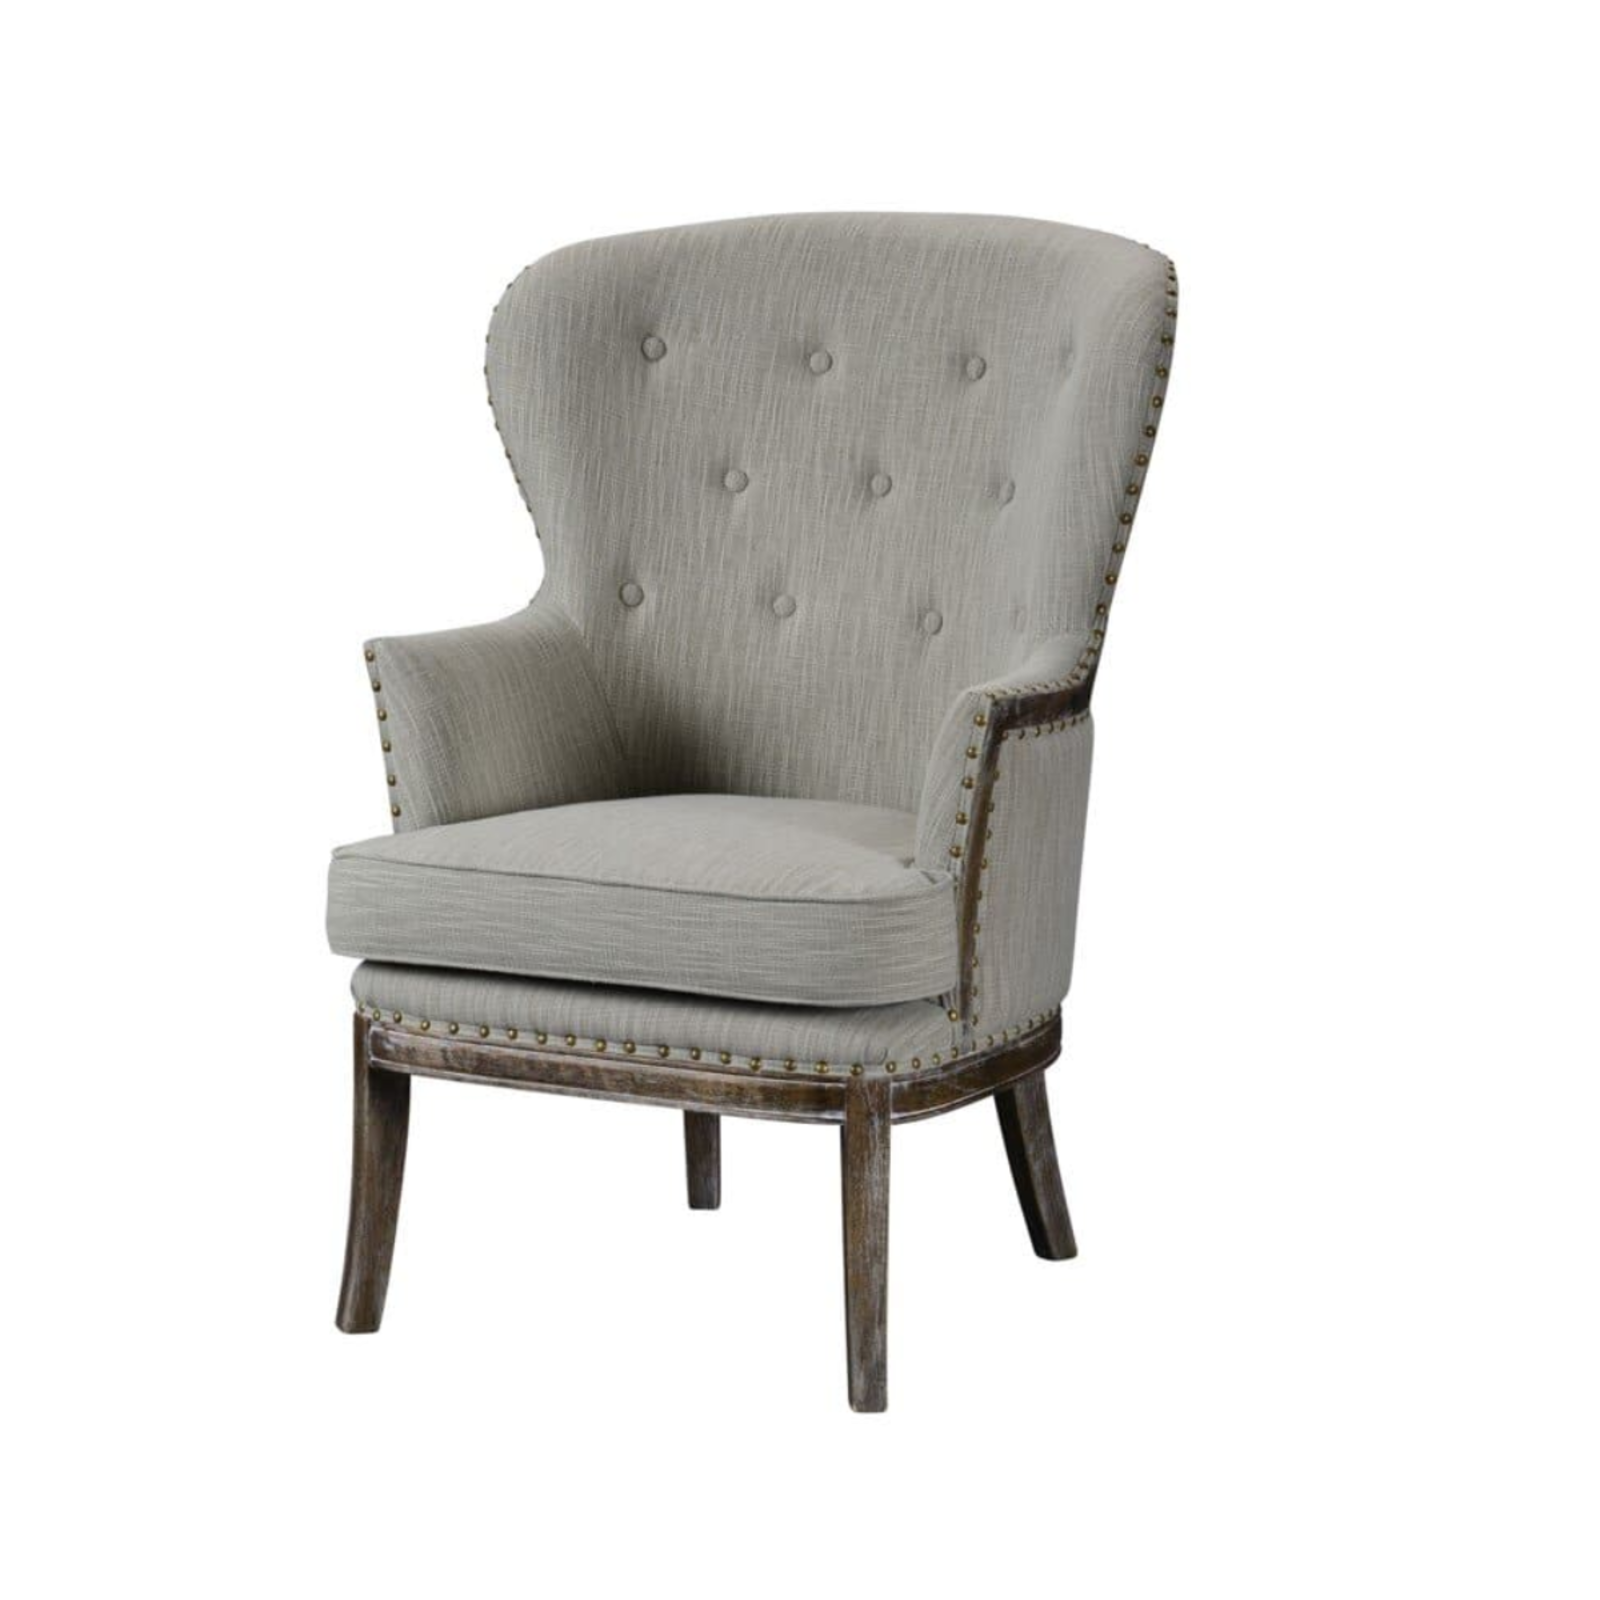 Forty West Camryn Chair   52527-BS loading=